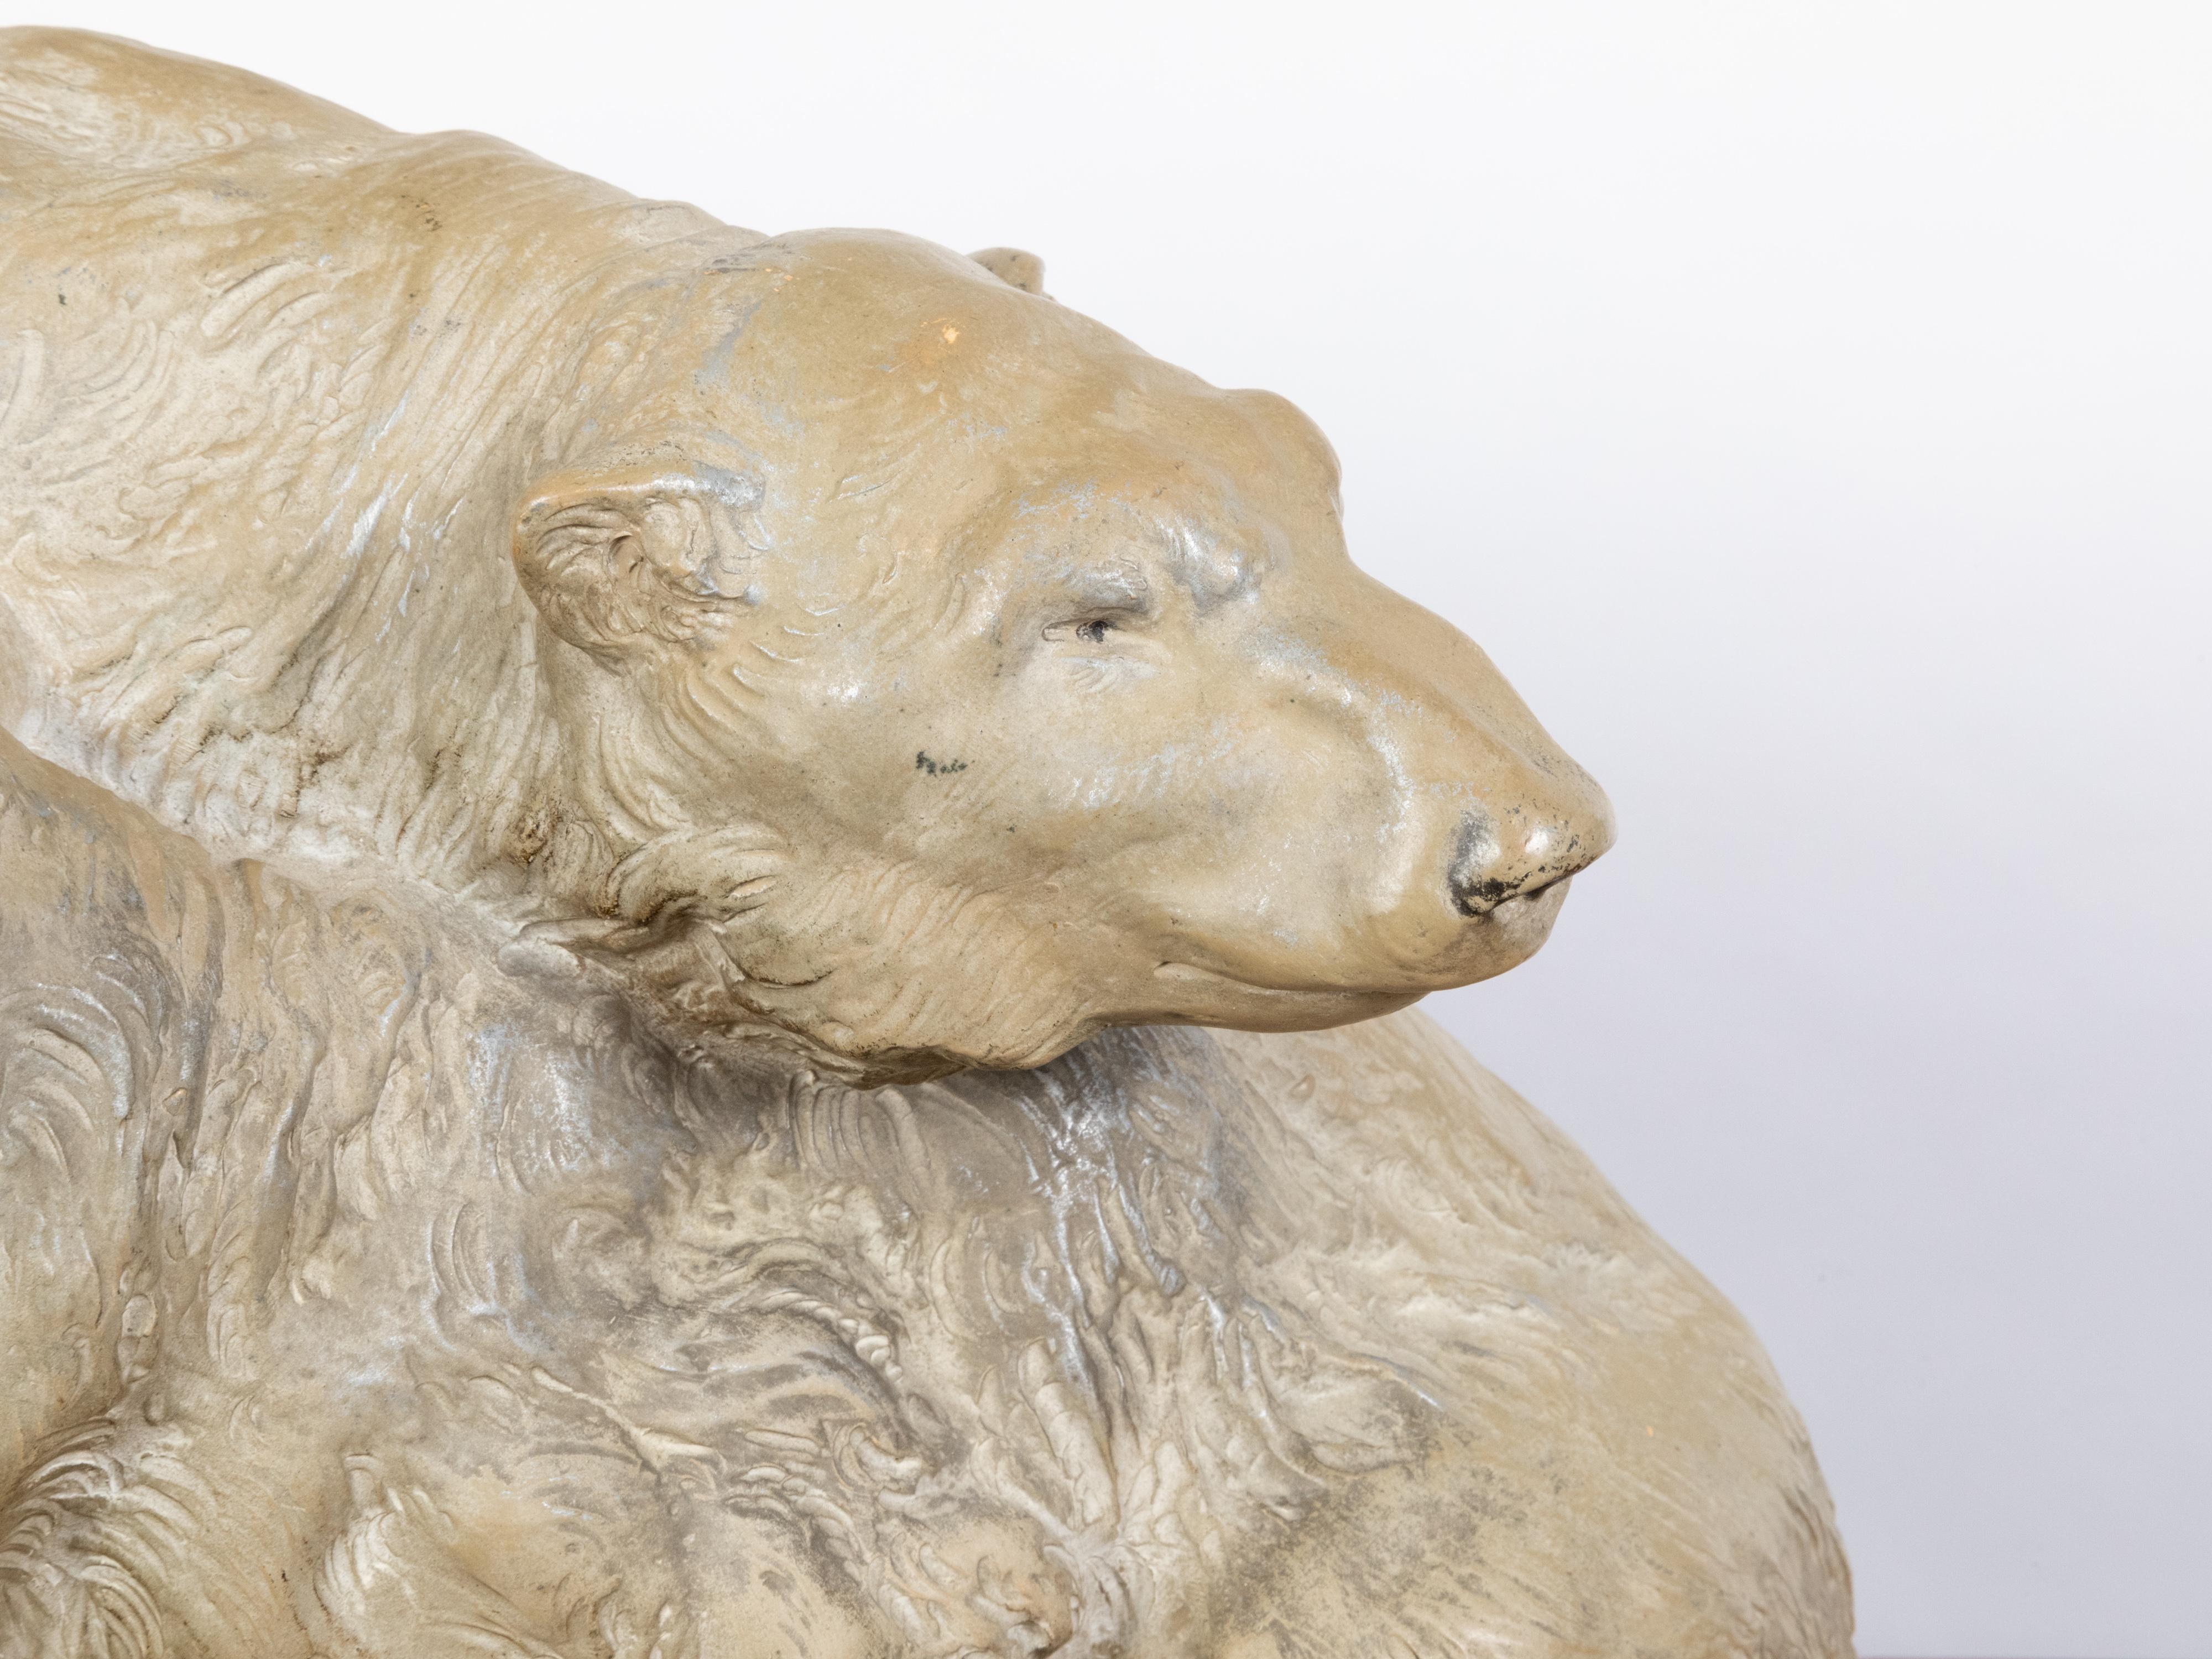 European Continental Midcentury Terracotta Sculpture Depicting Two Bears on a Base For Sale